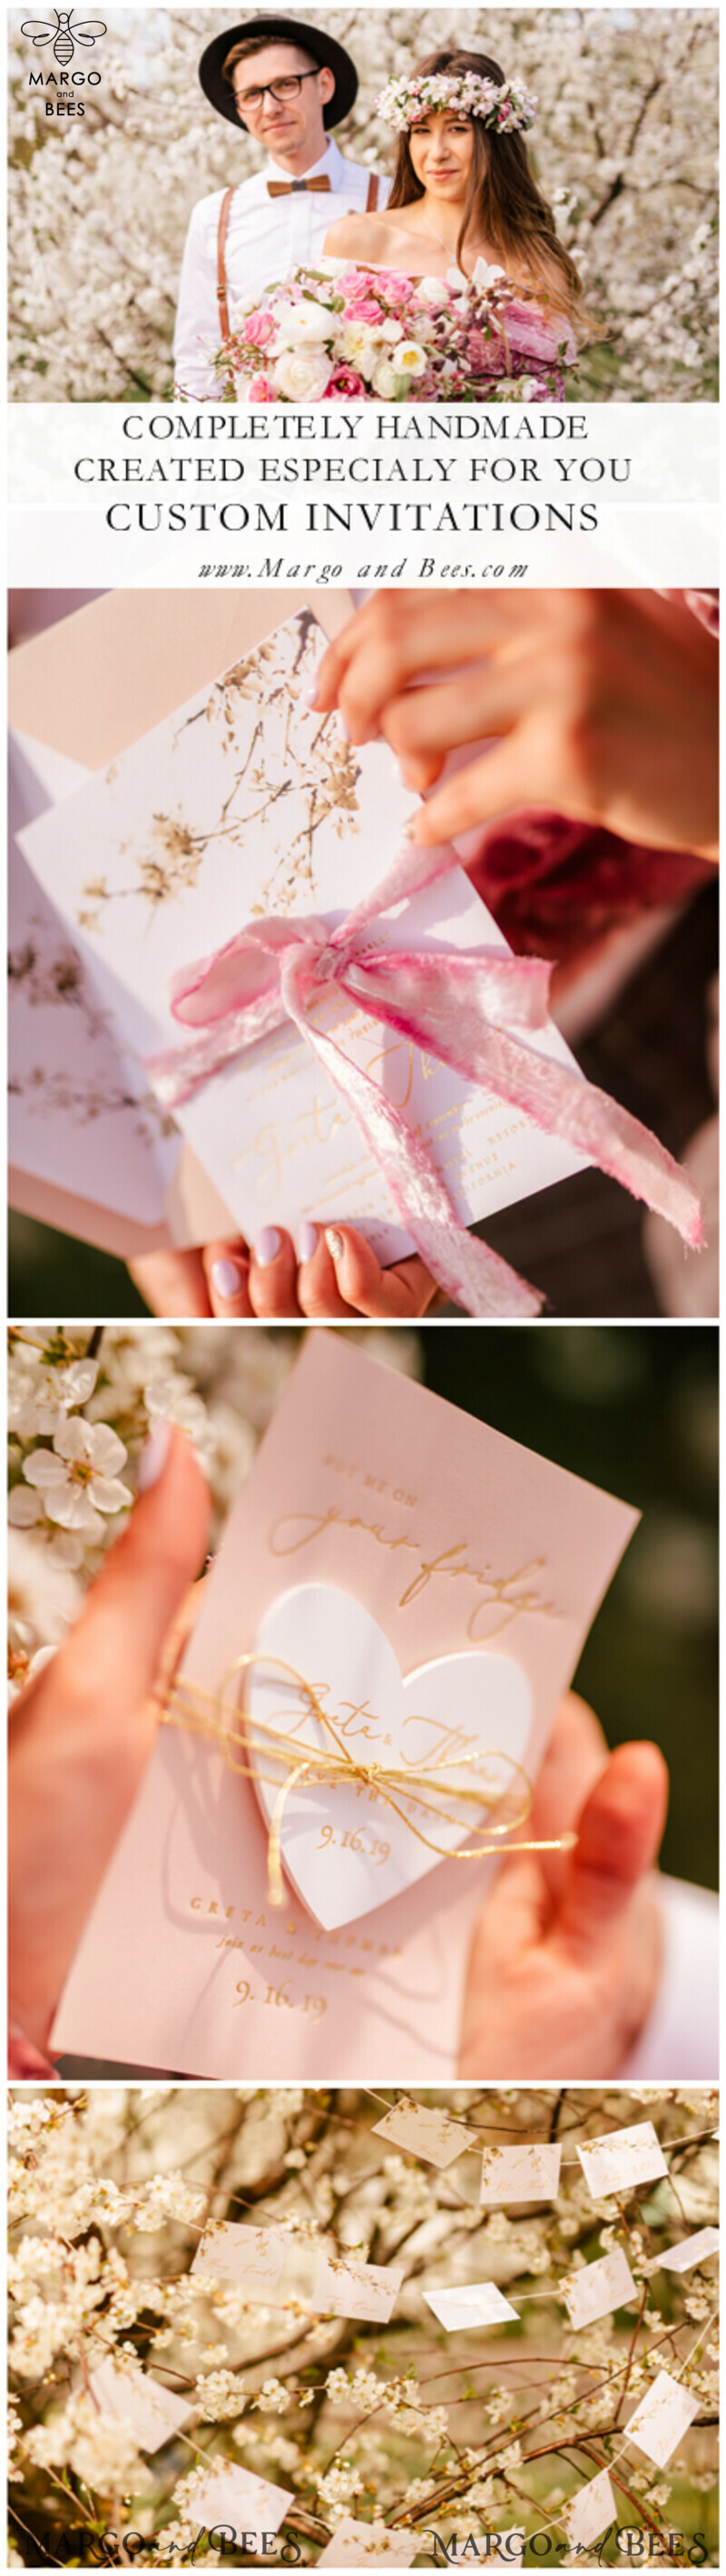 Cherry Blossom Personalized Wedding Invitations Elegant Stationery with Golden Letter Velvet silk Bow Blush Pink Envelope with Floral Liner-49